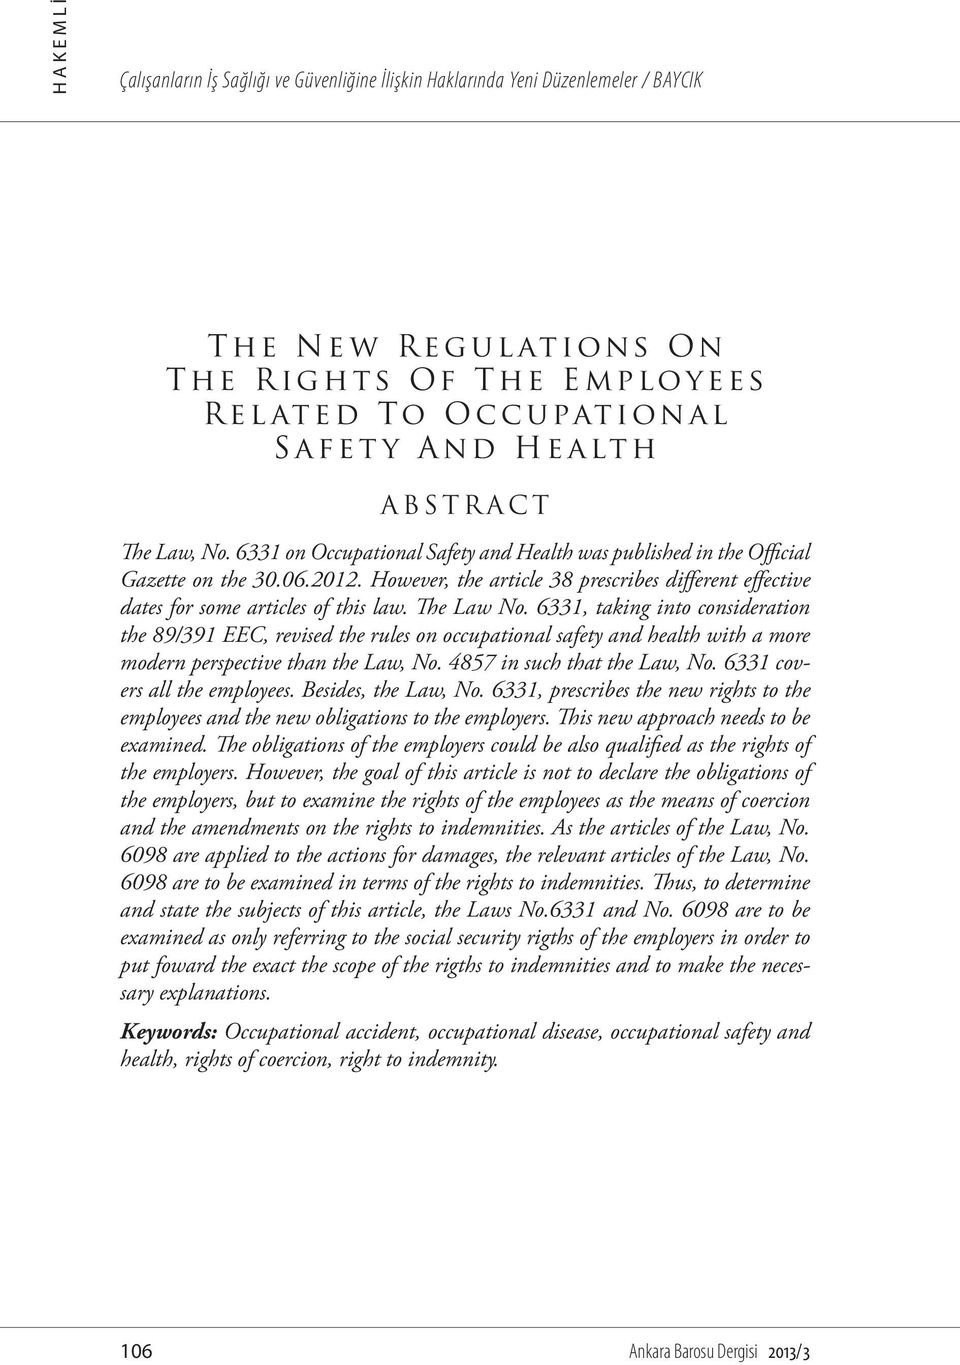 The Law No. 6331, taking into consideration the 89/391 EEC, revised the rules on occupational safety and health with a more modern perspective than the Law, No. 4857 in such that the Law, No.